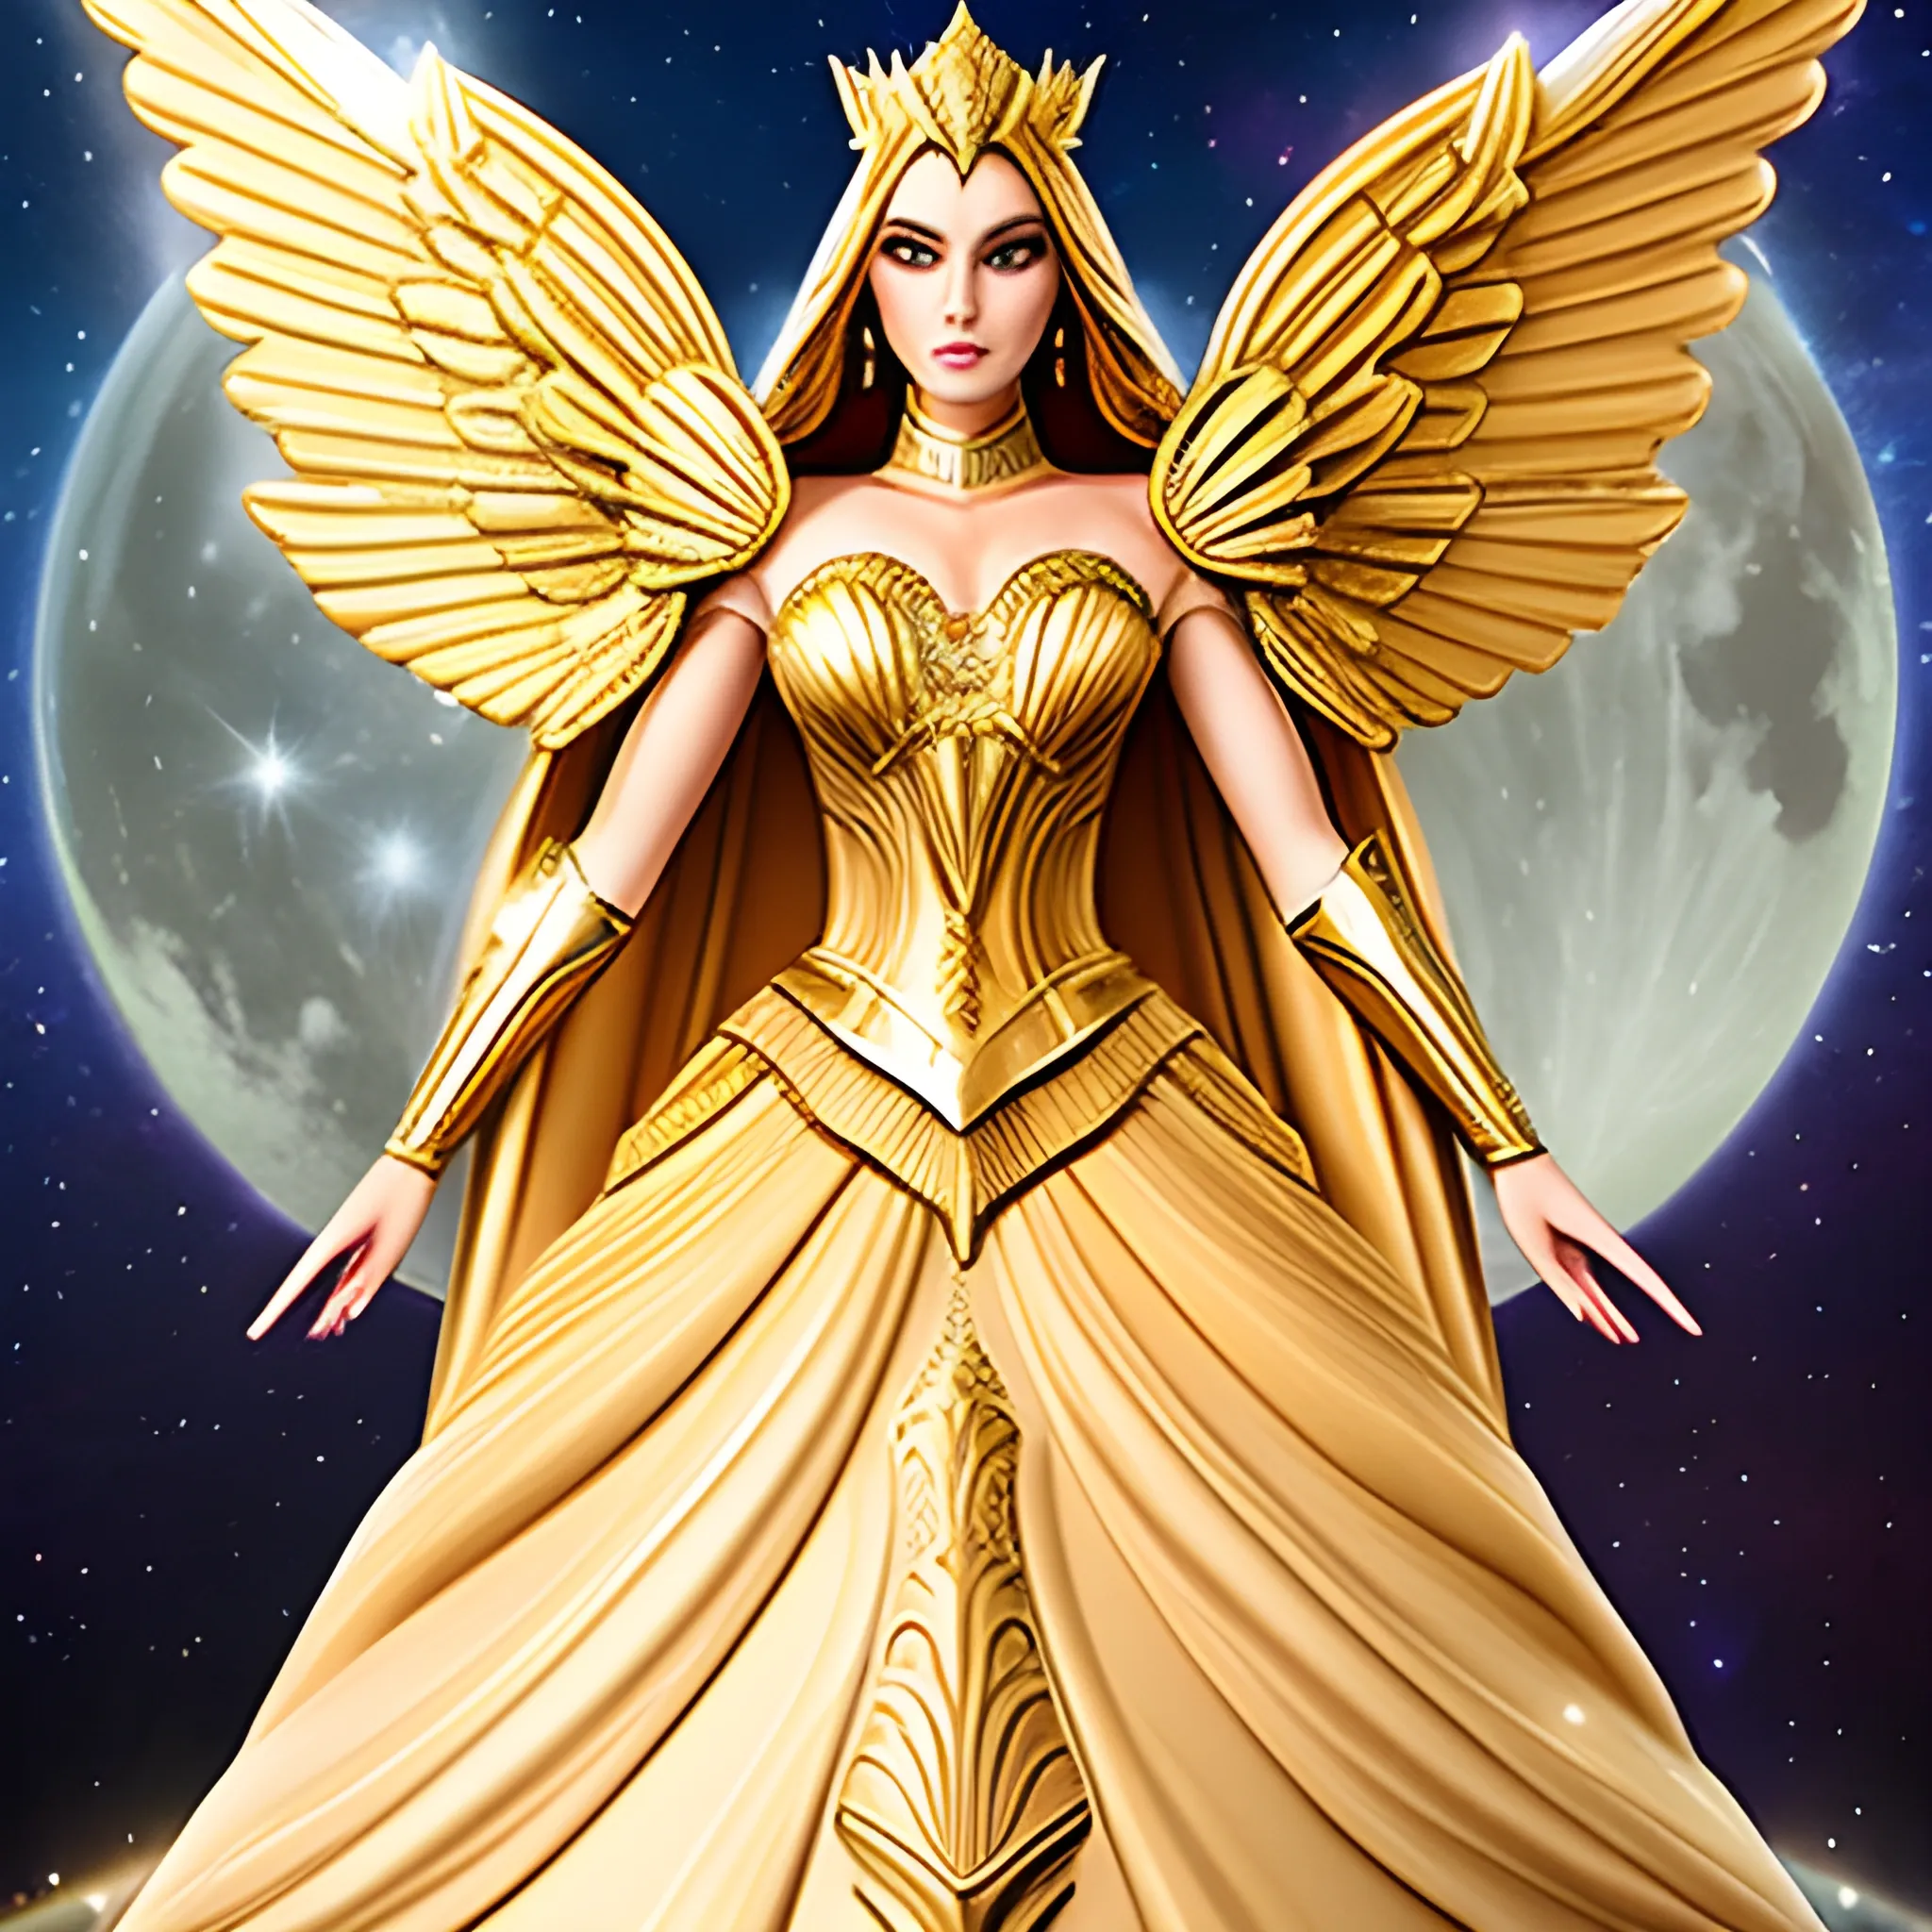 Golden galaxy goddess Angel fairy Queen princess dream wedding dress with cape and high collar warrior moon goddess armor majestic supreme powerful starchild thoth